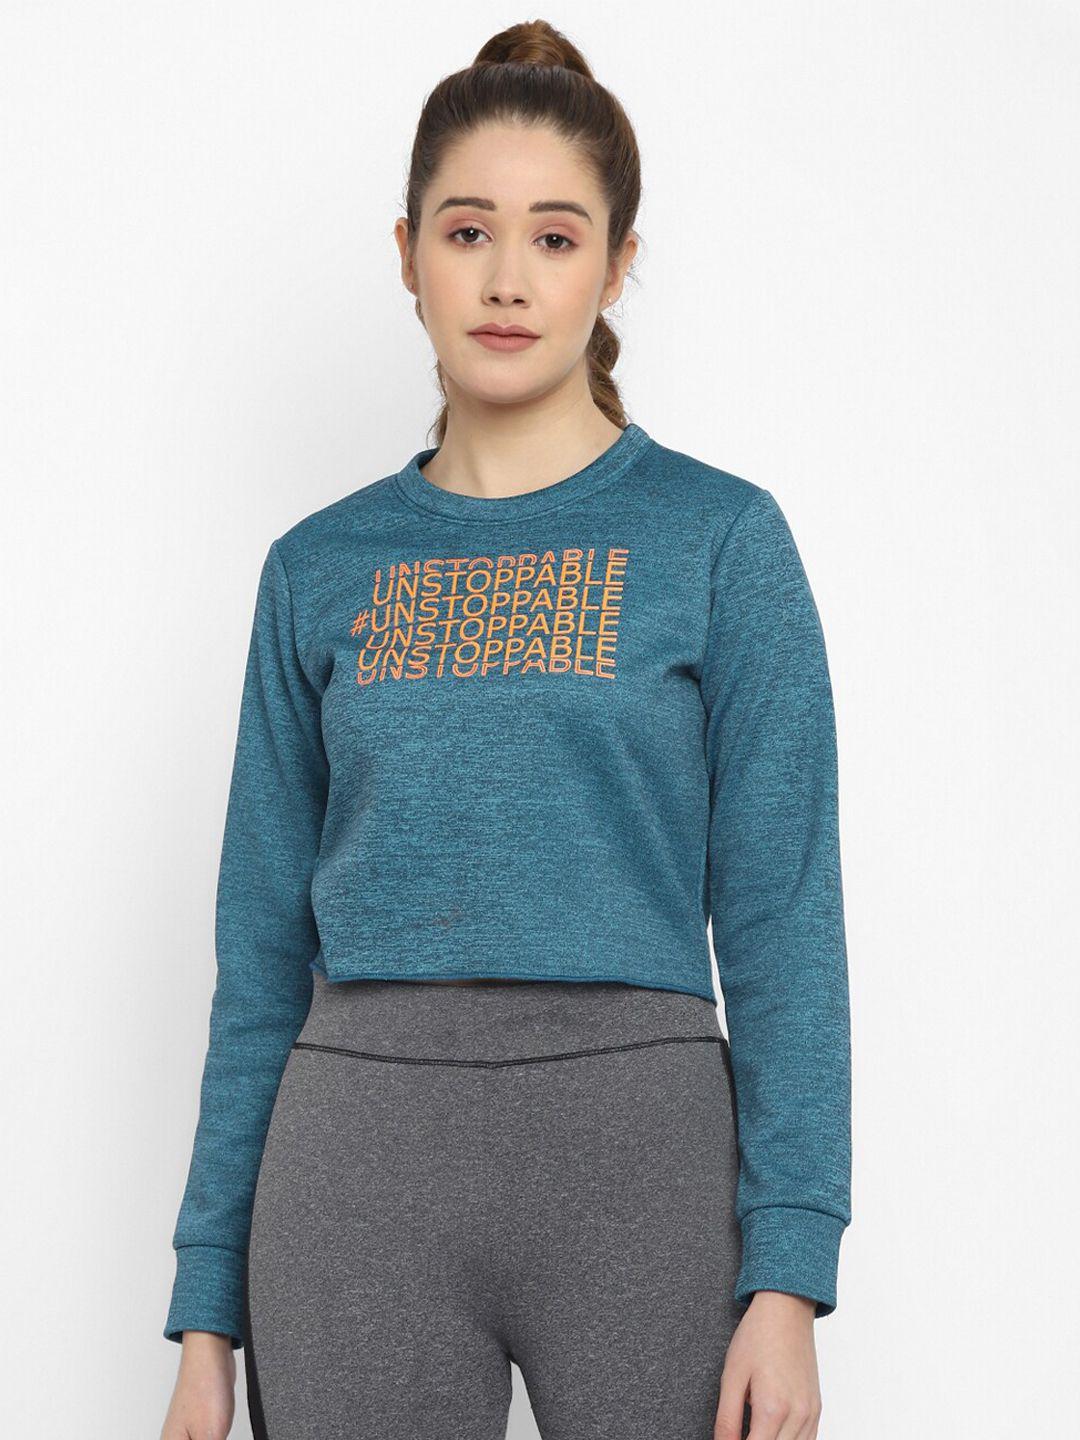 off limits women teal blue printed cropped sweatshirt